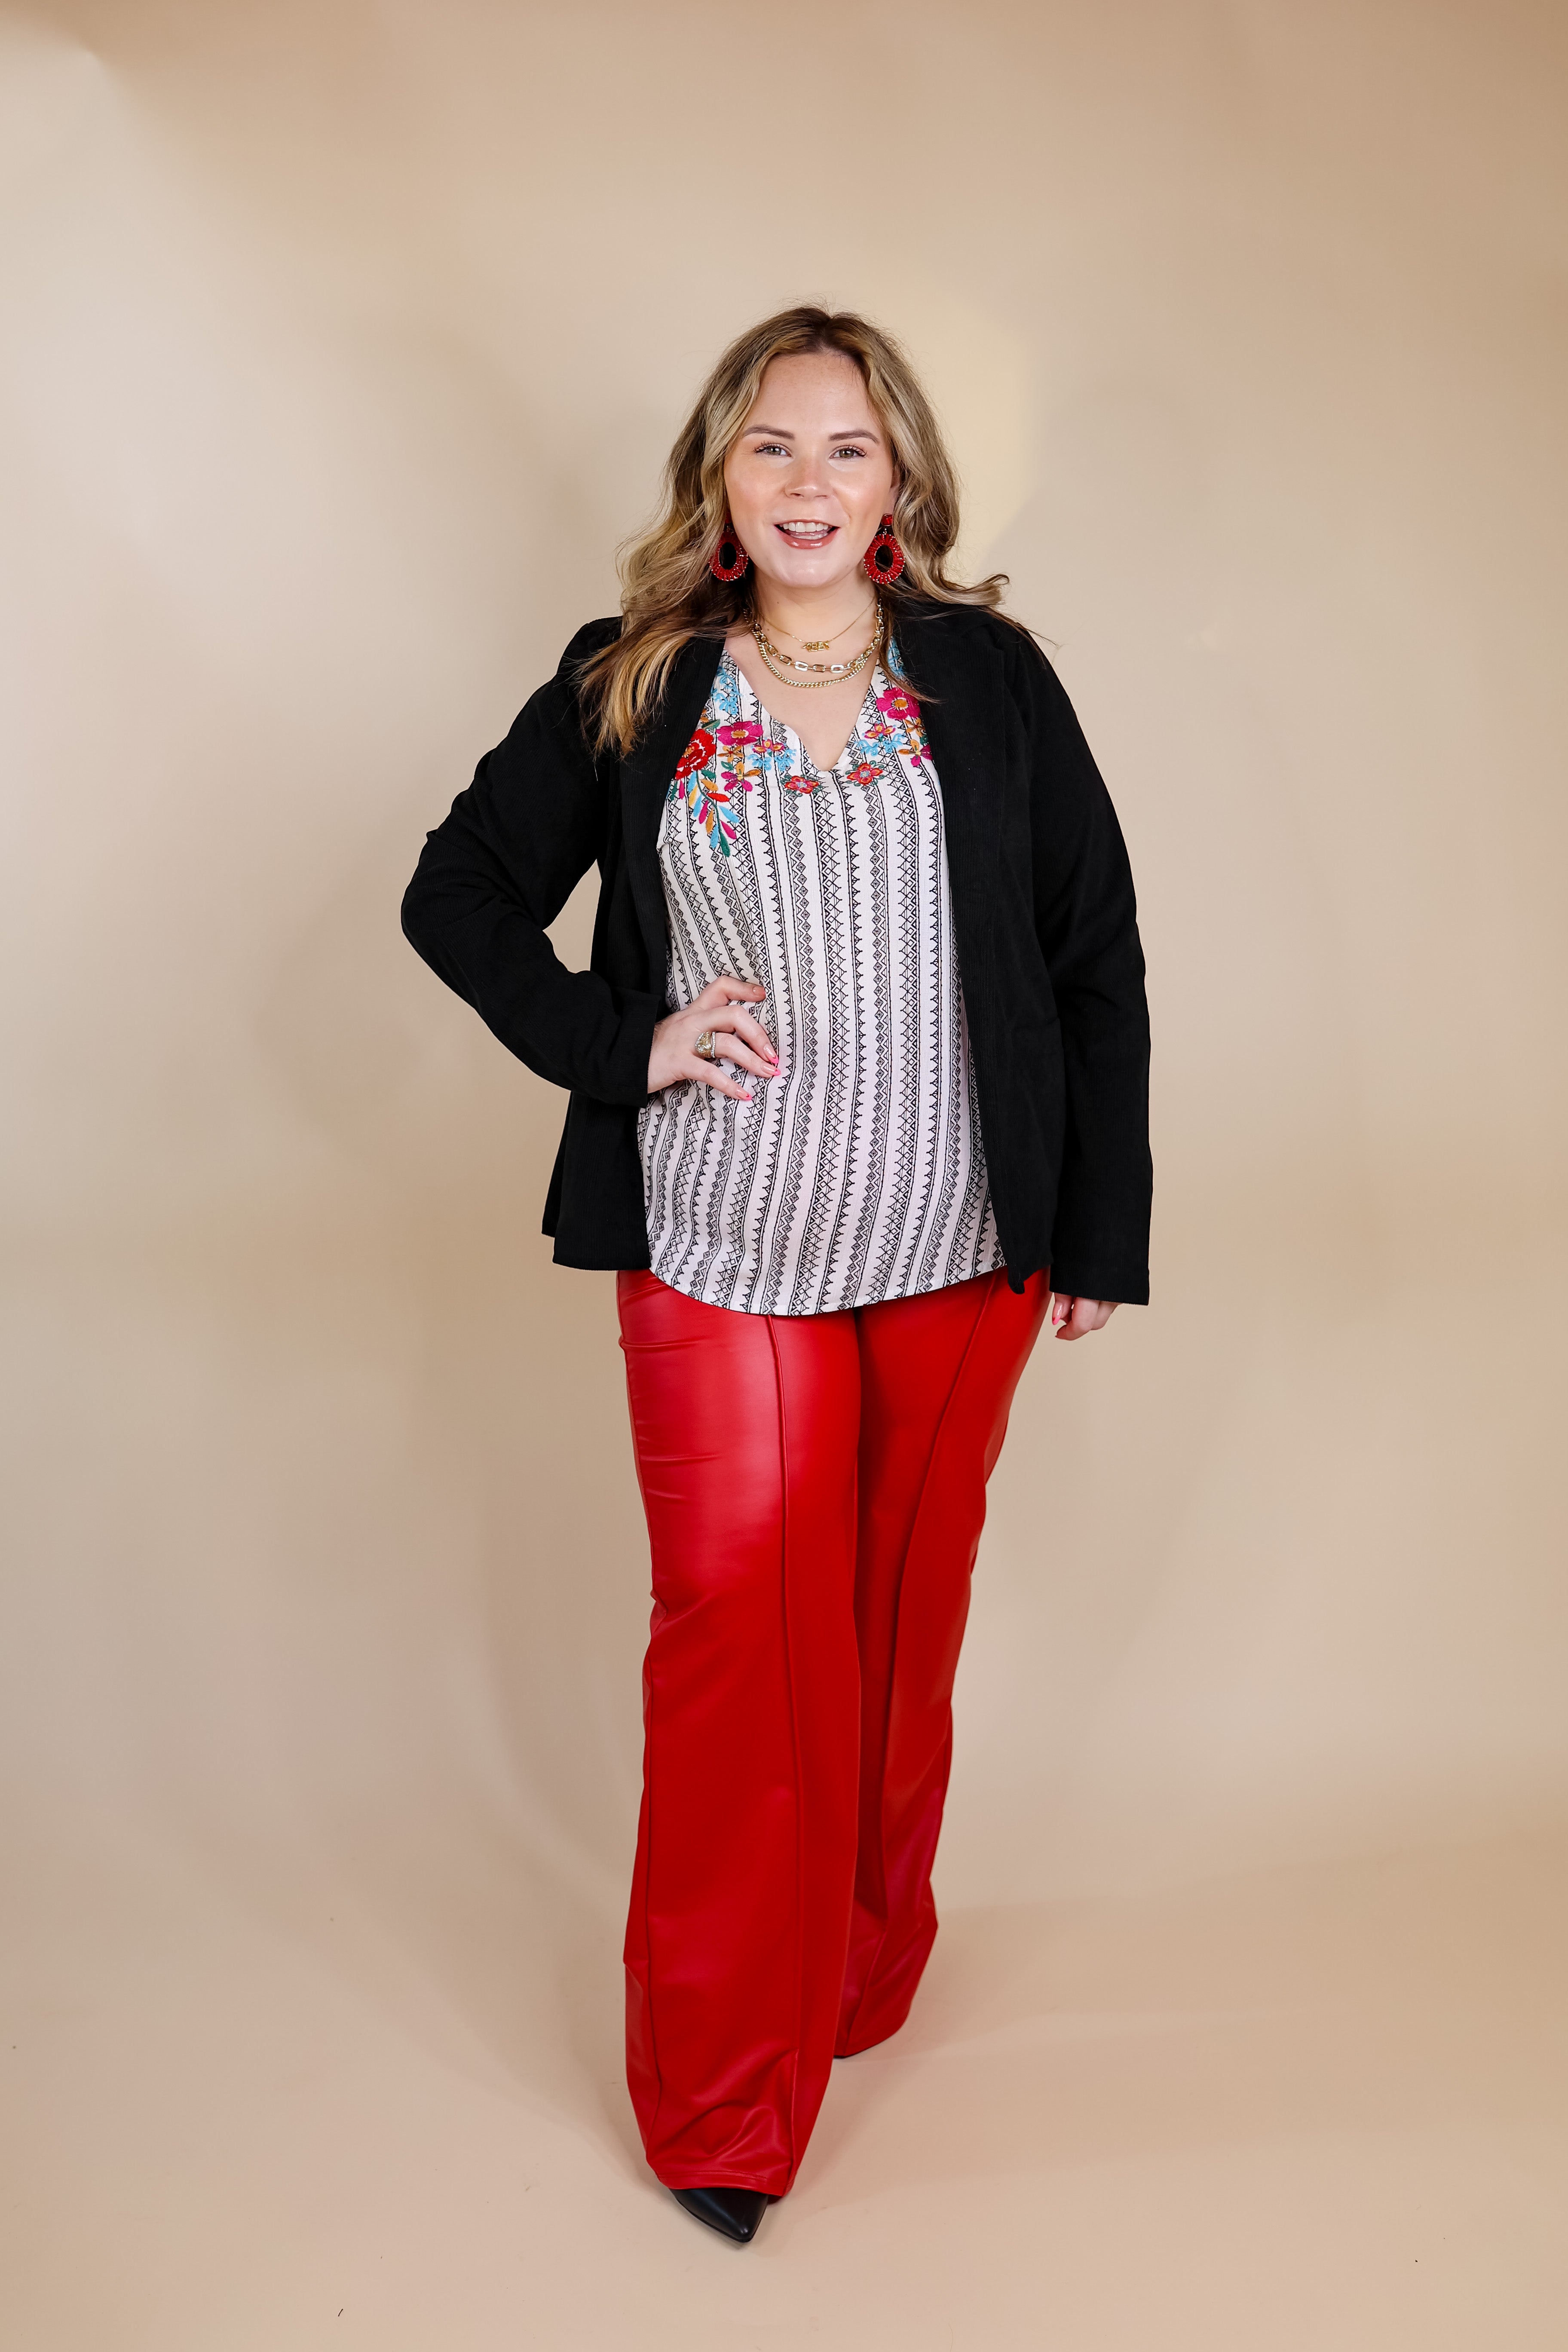 New York Groove Corduroy Blazer in Black - Giddy Up Glamour Boutique